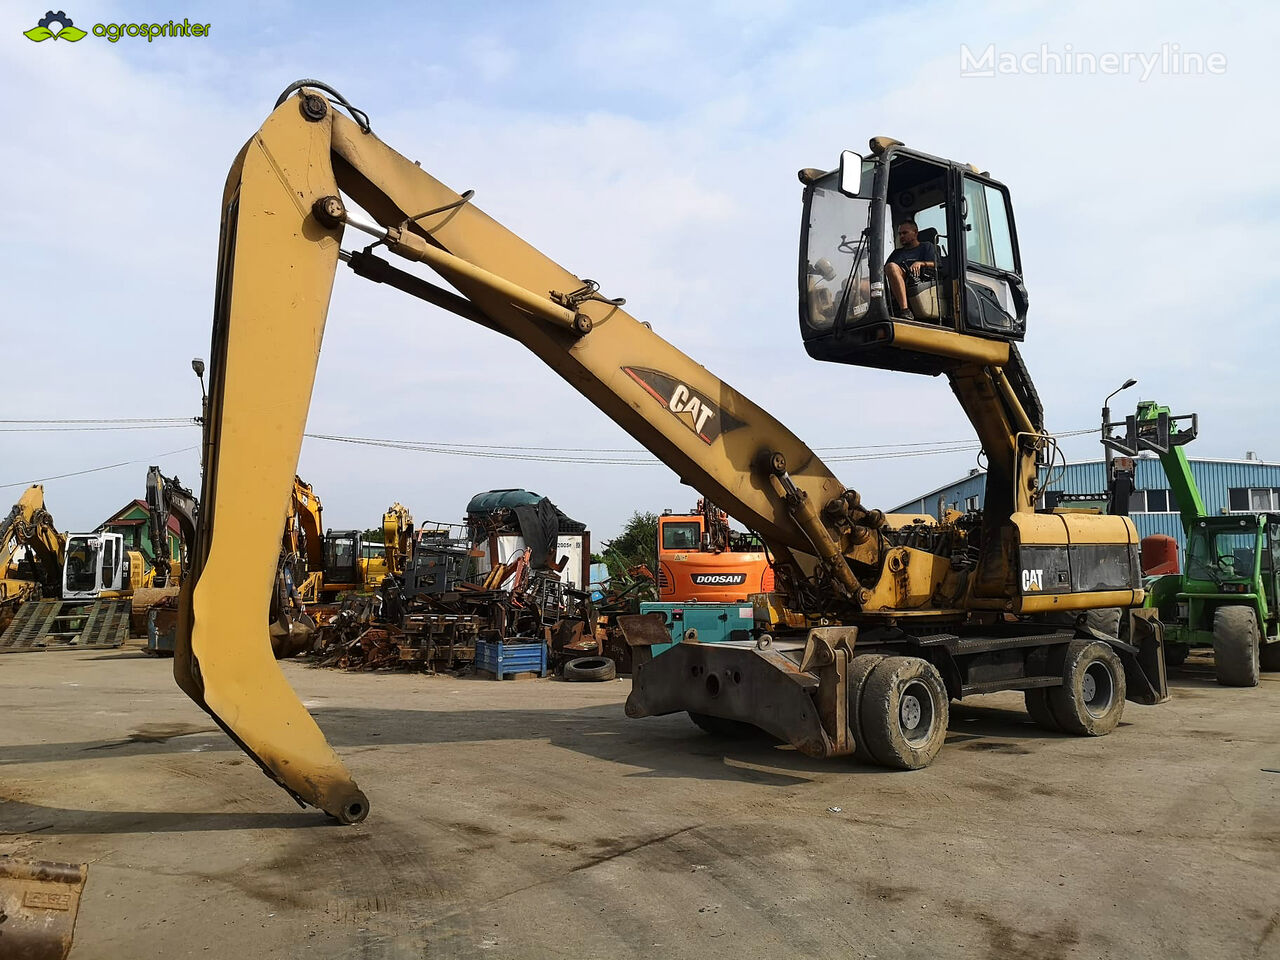 Caterpillar M322C MH Umschlagbagger